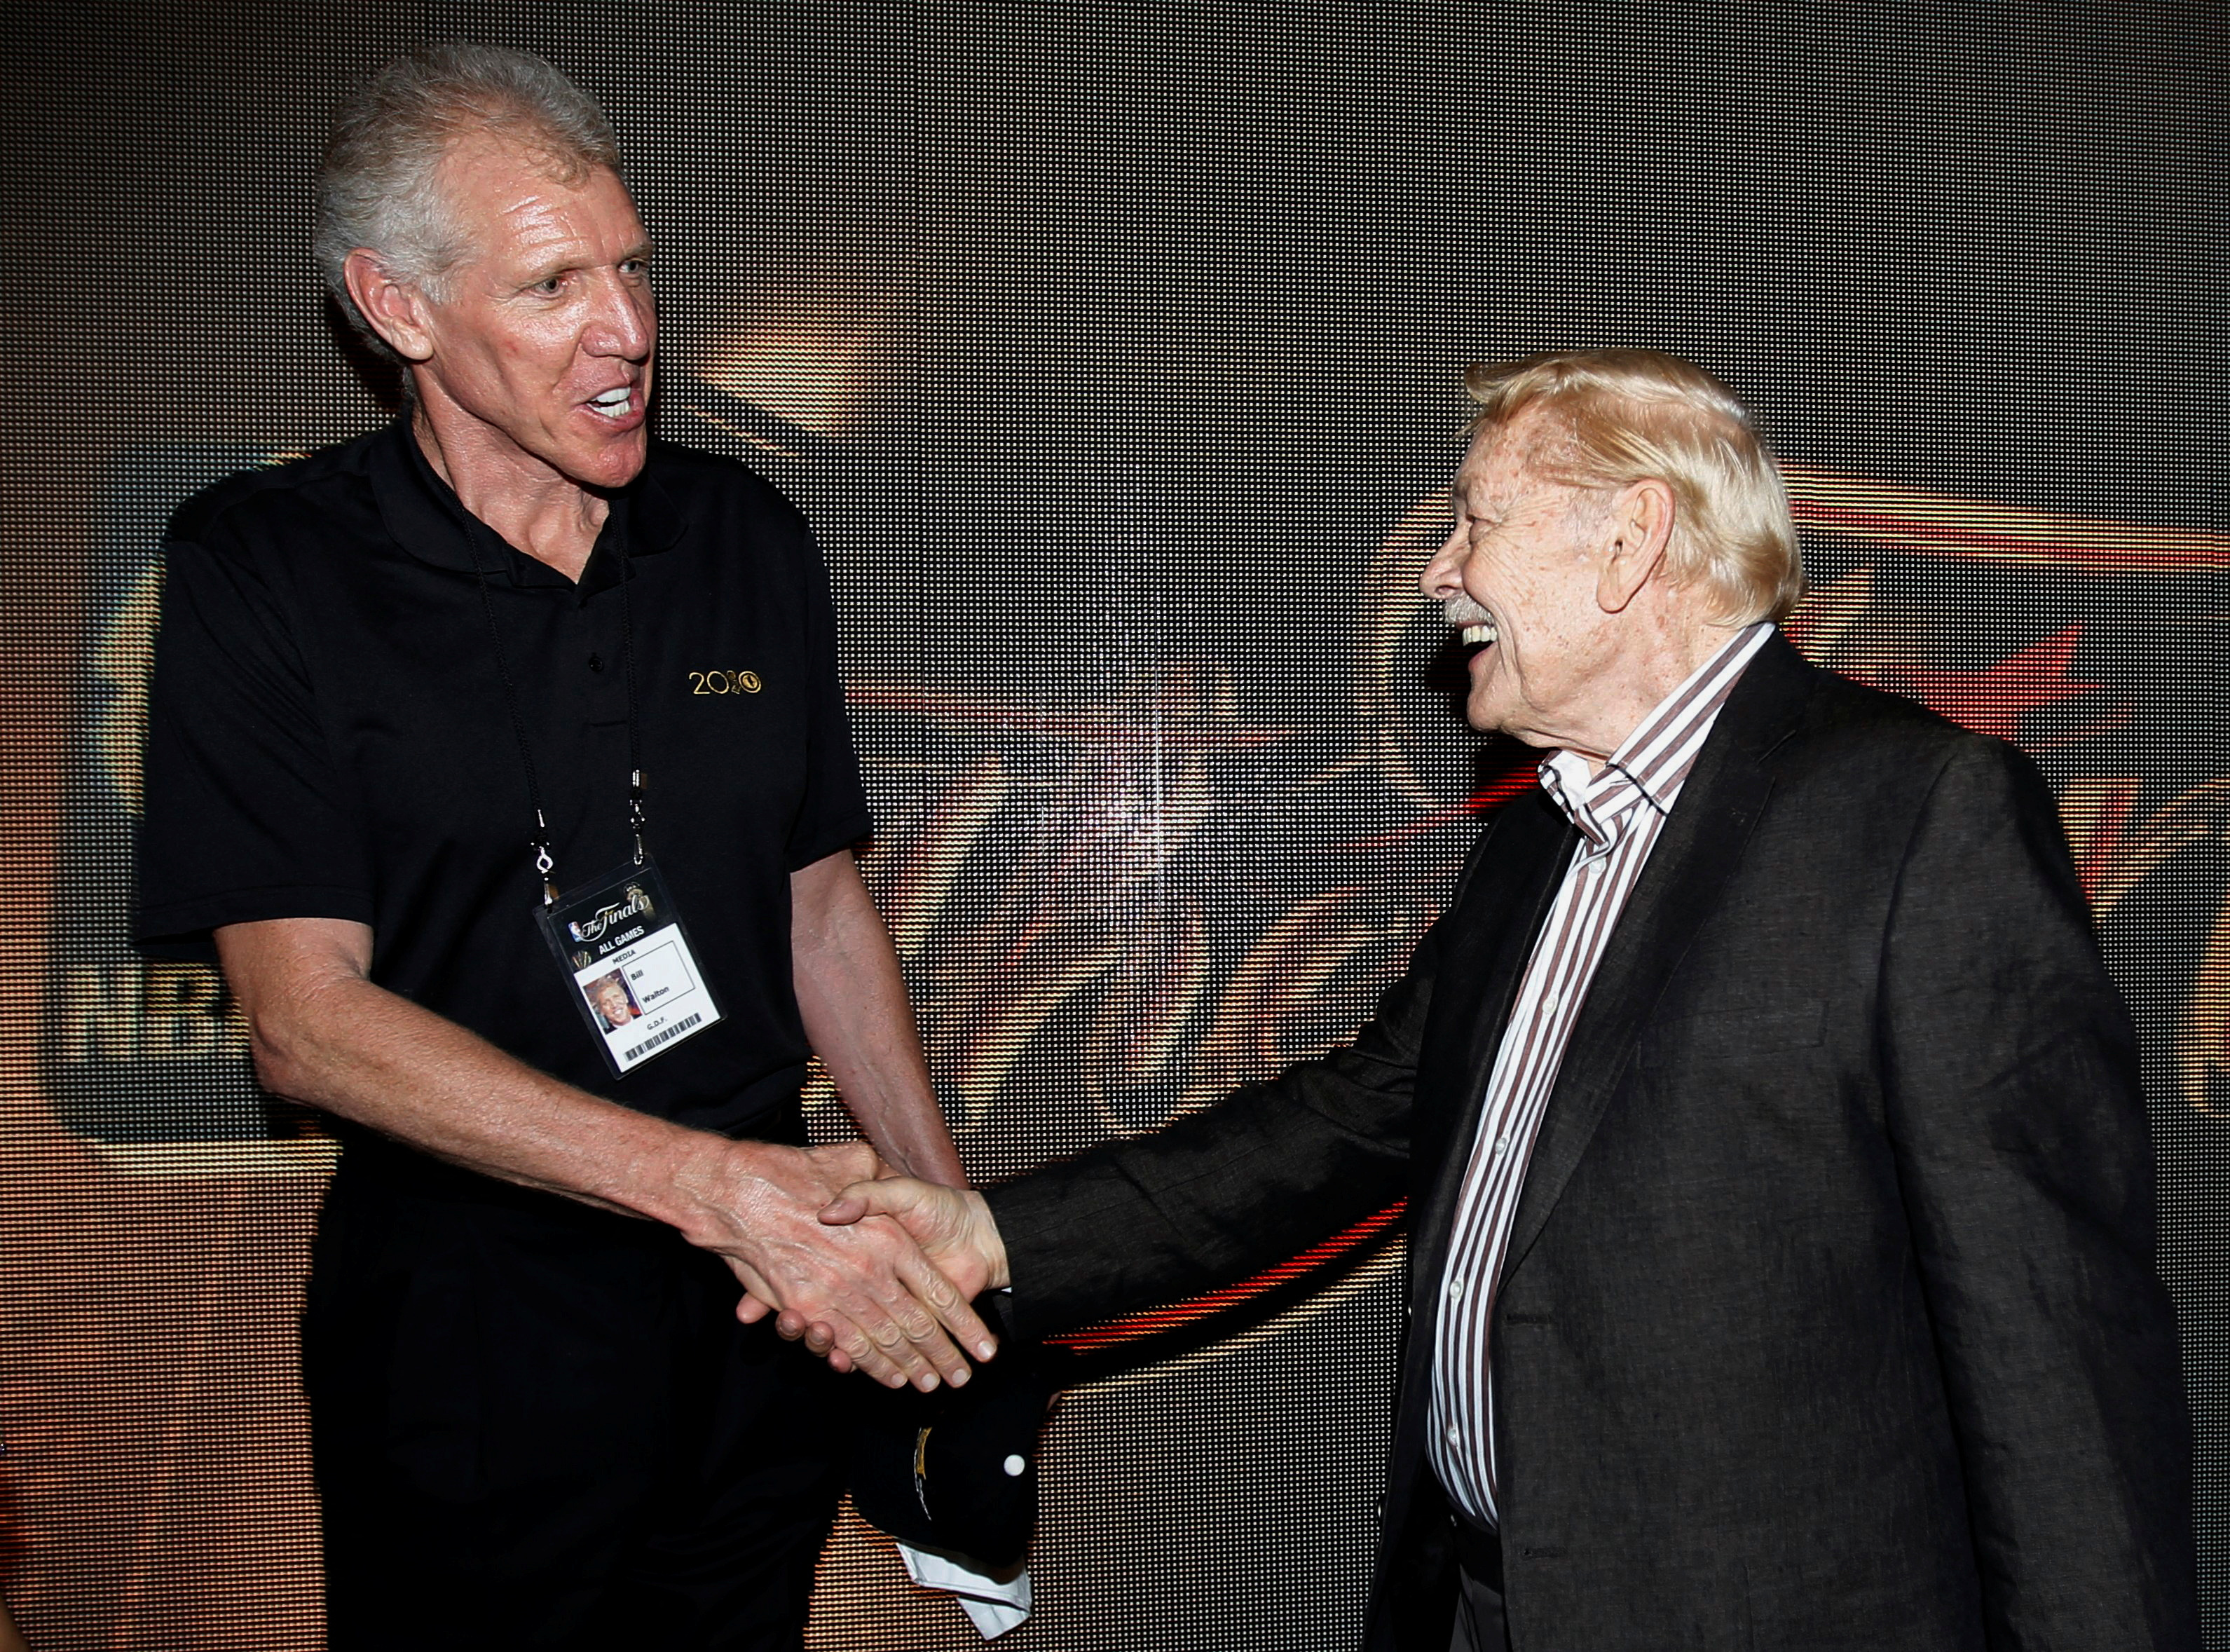 Fomer NBA star Bill Walton talks with Lakers team owner Jerry Buss after Game 7 of the 2010 NBA Finals basketball series in Los Angeles